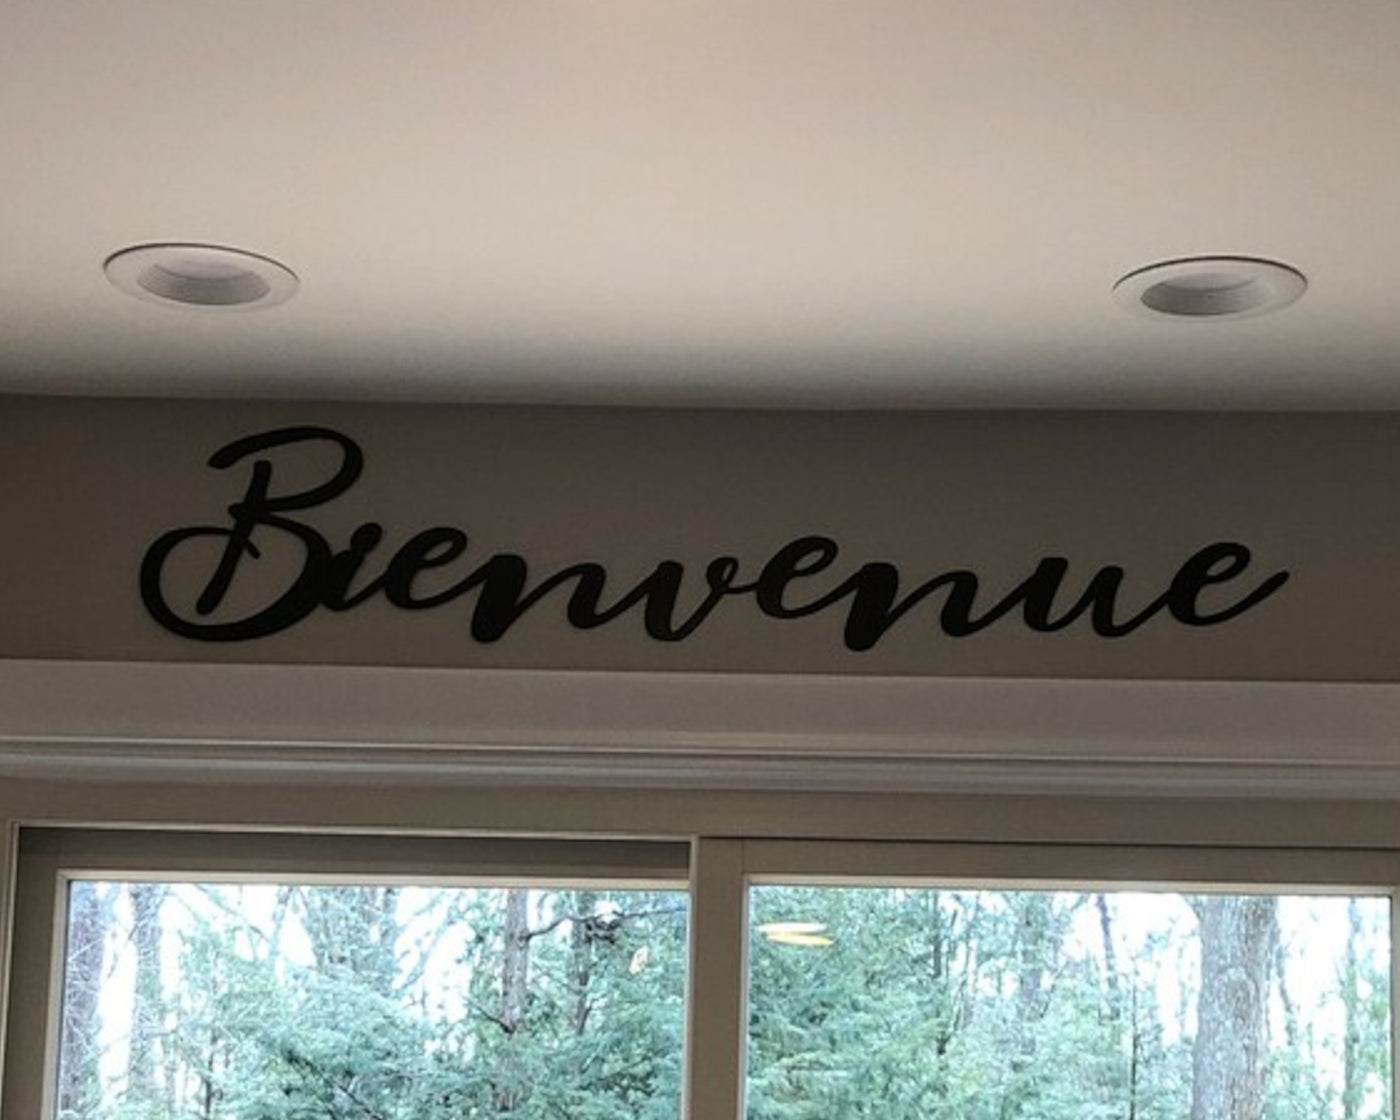 Bienvenue Metal Word Sign - Madison Iron and Wood - Wall Art - metal outdoor decor - Steel deocrations - american made products - veteran owned business products - fencing decorations - fencing supplies - custom wall decorations - personalized wall signs - steel - decorative post caps - steel post caps - metal post caps - brackets - structural brackets - home improvement - easter - easter decorations - easter gift - easter yard decor